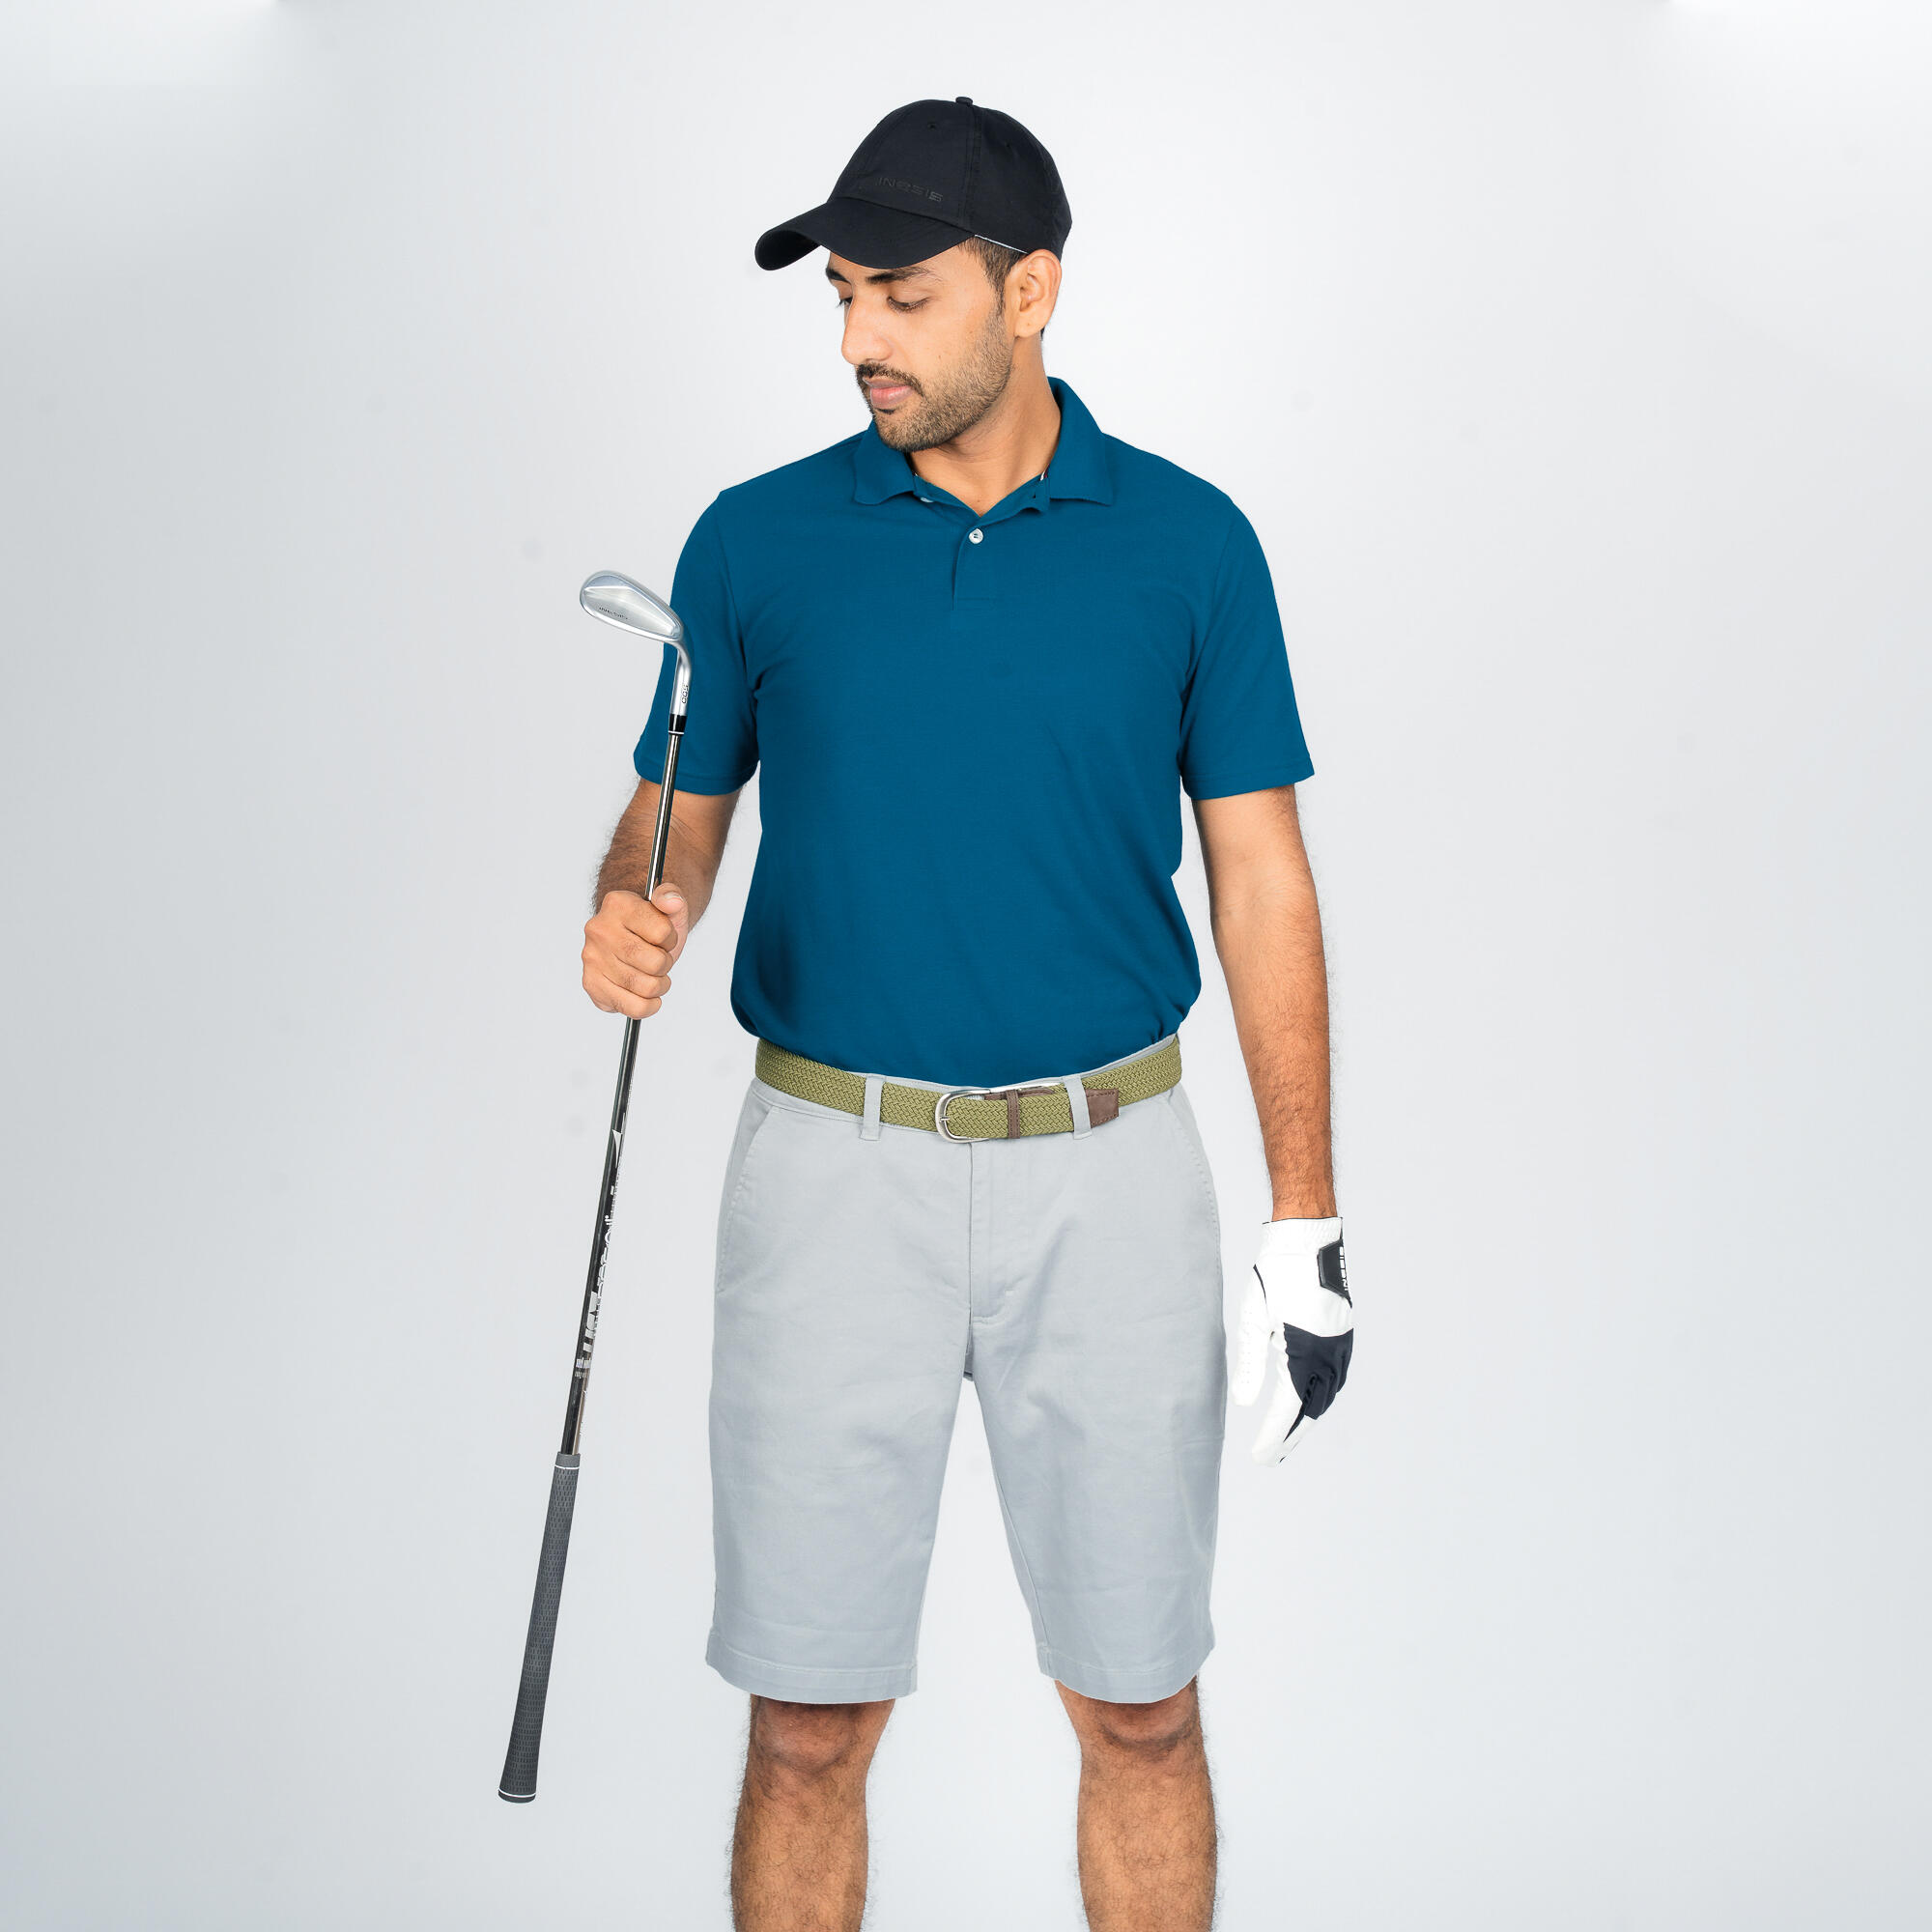 Golf - Buy Golf Products, latest golf clubs, golf shoes, golf bag and  trolleys Online at Decathlon India